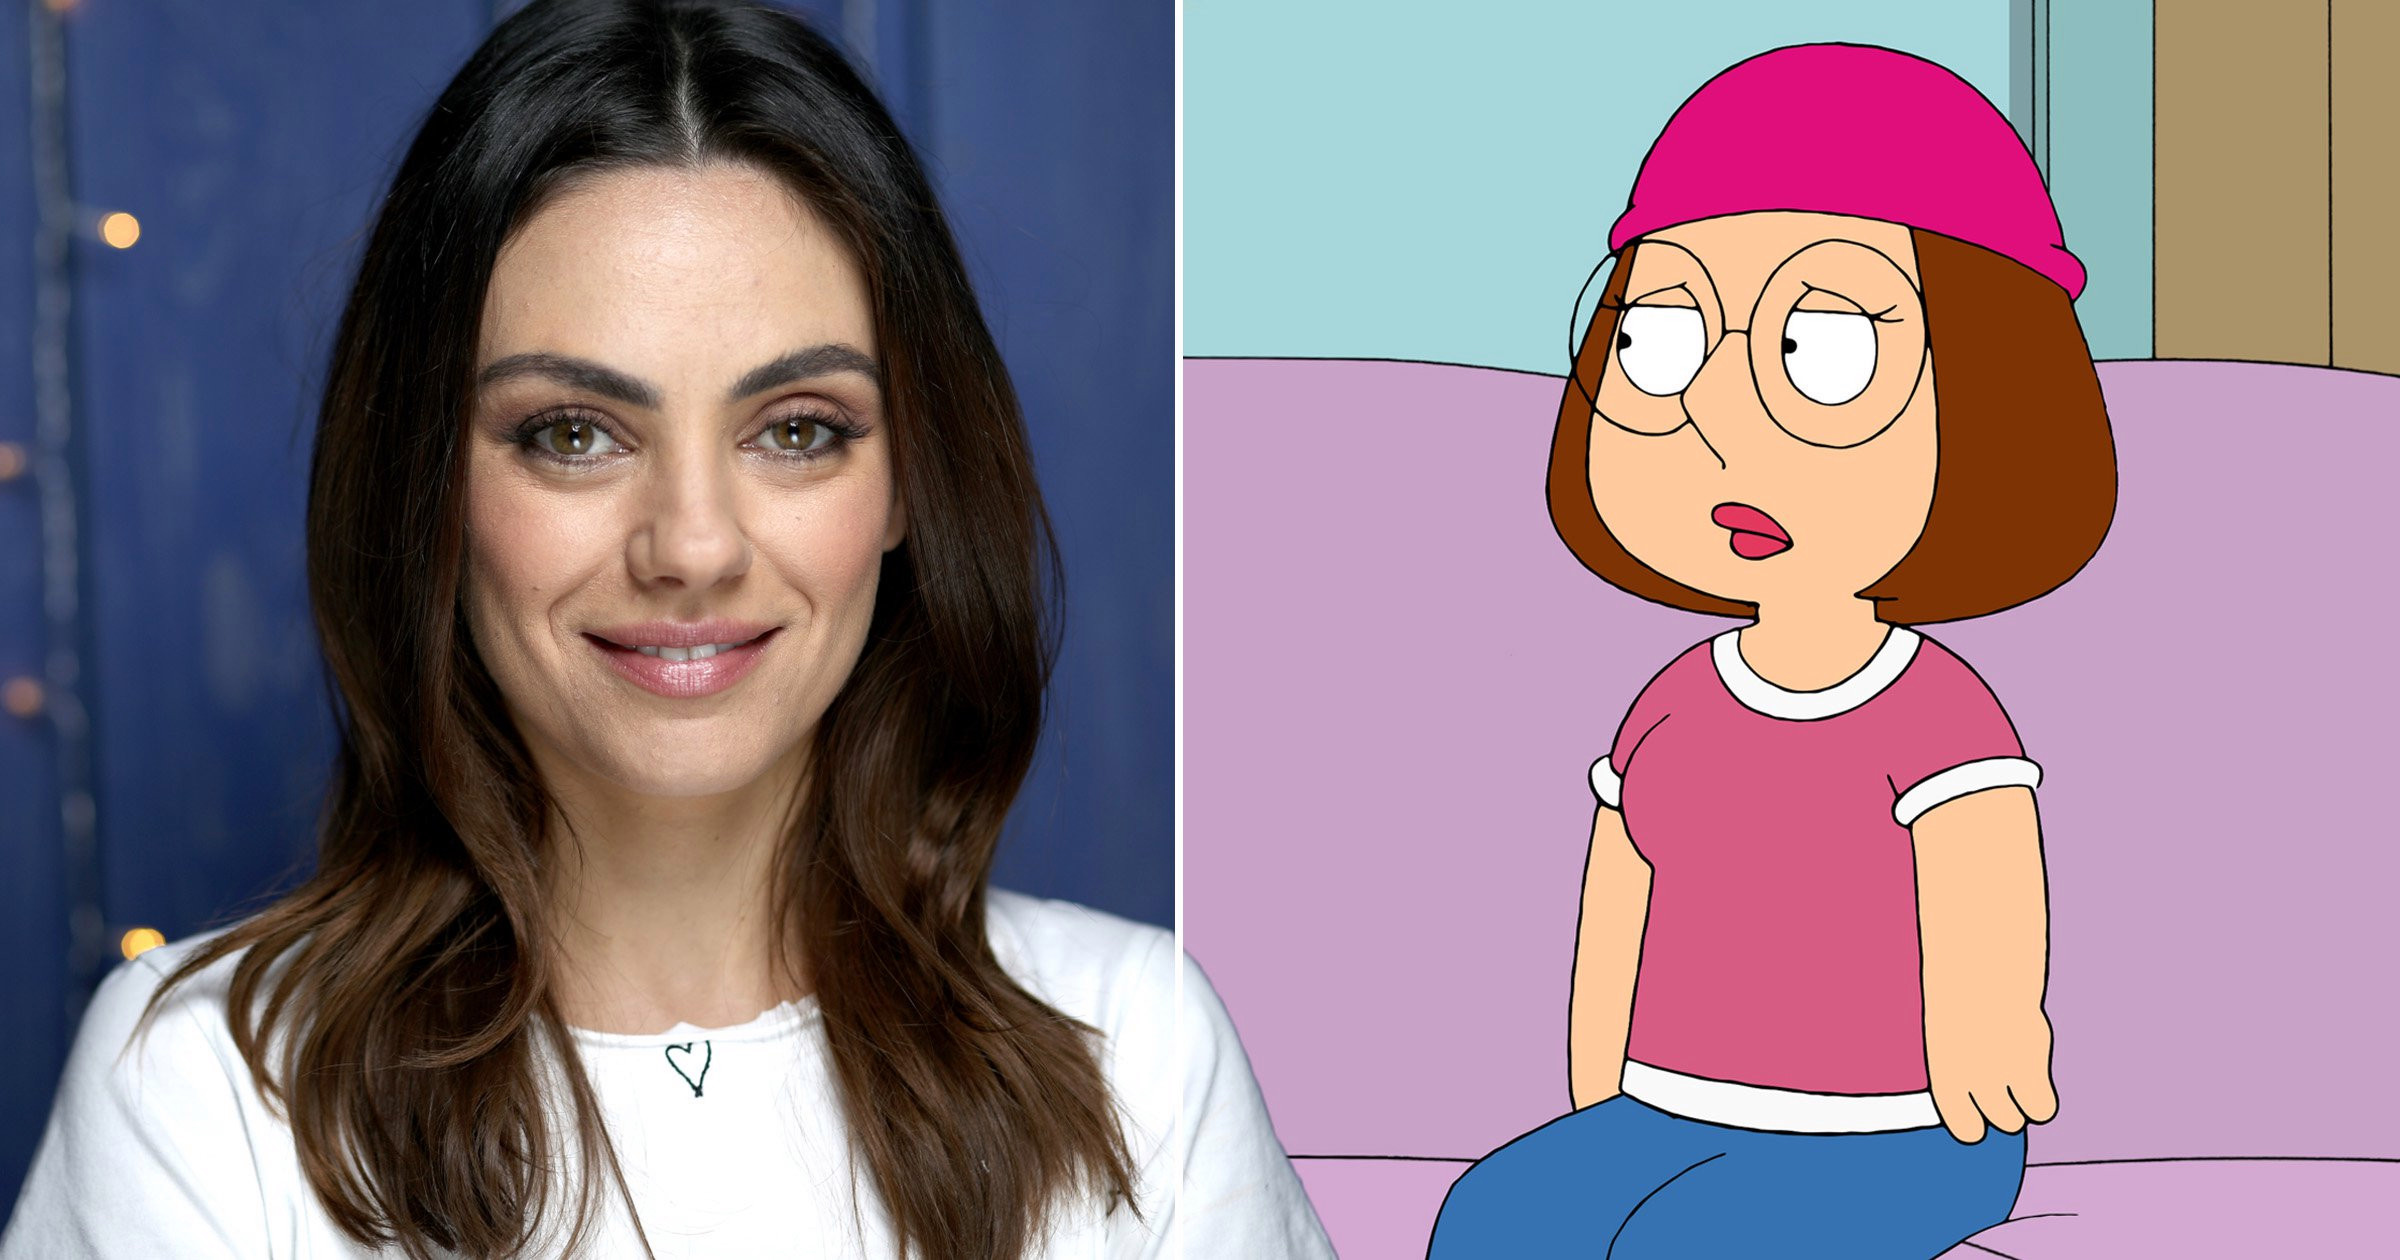 Mila Kunis describes playing Meg Griffin on Family Guy as ‘the greatest job ever’